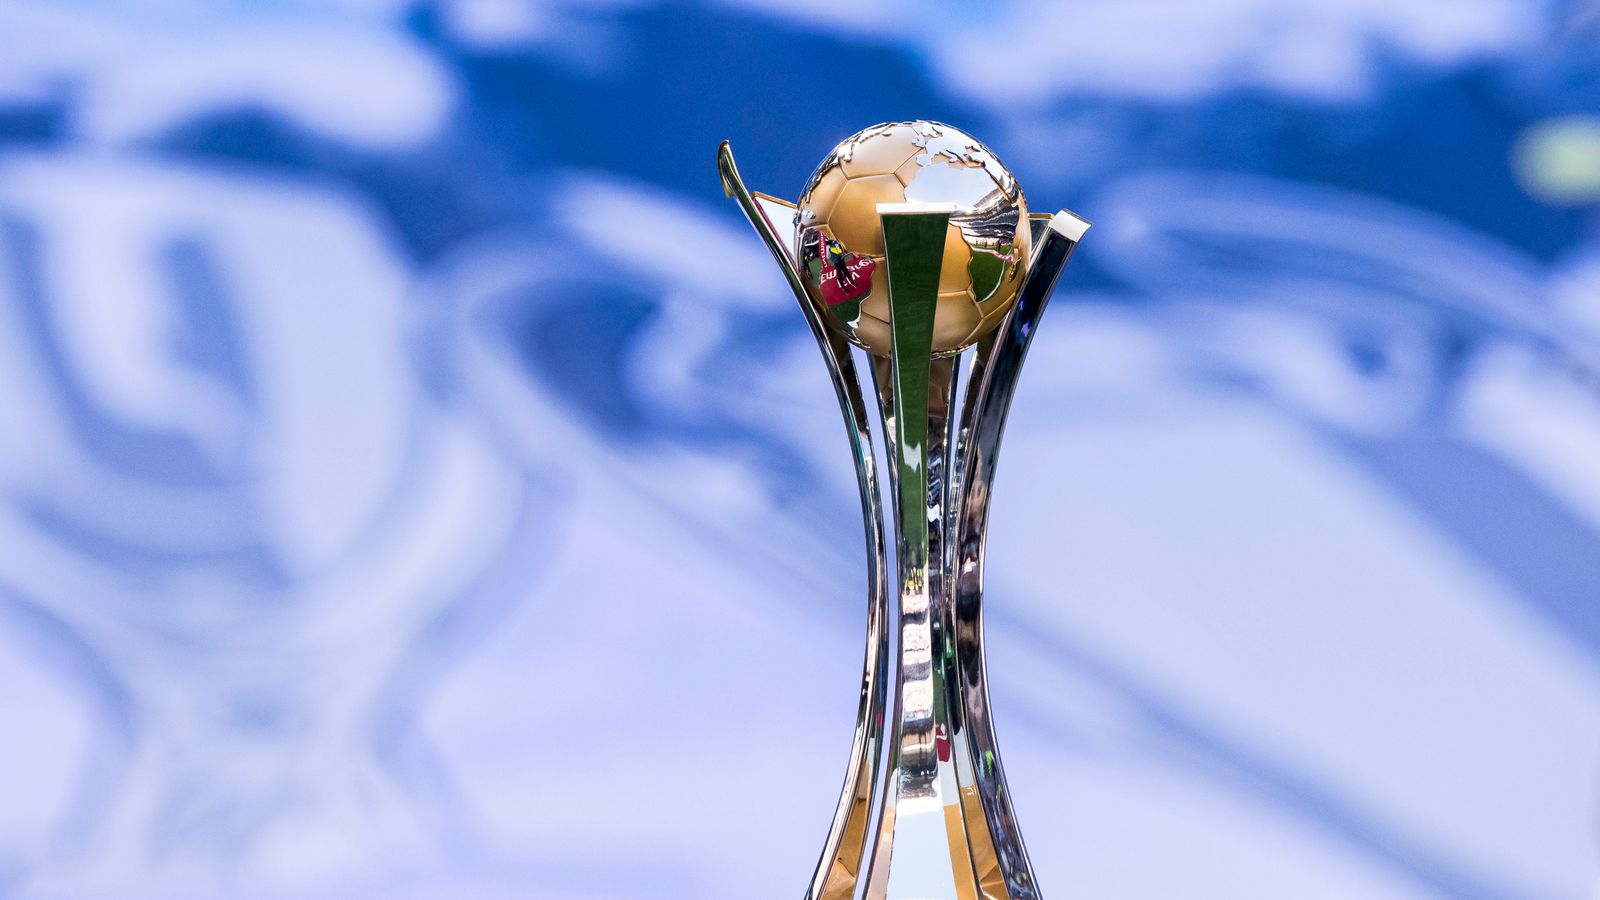 fifa-club-world-cup-moved-to-february-2021-due-to-coronavirus